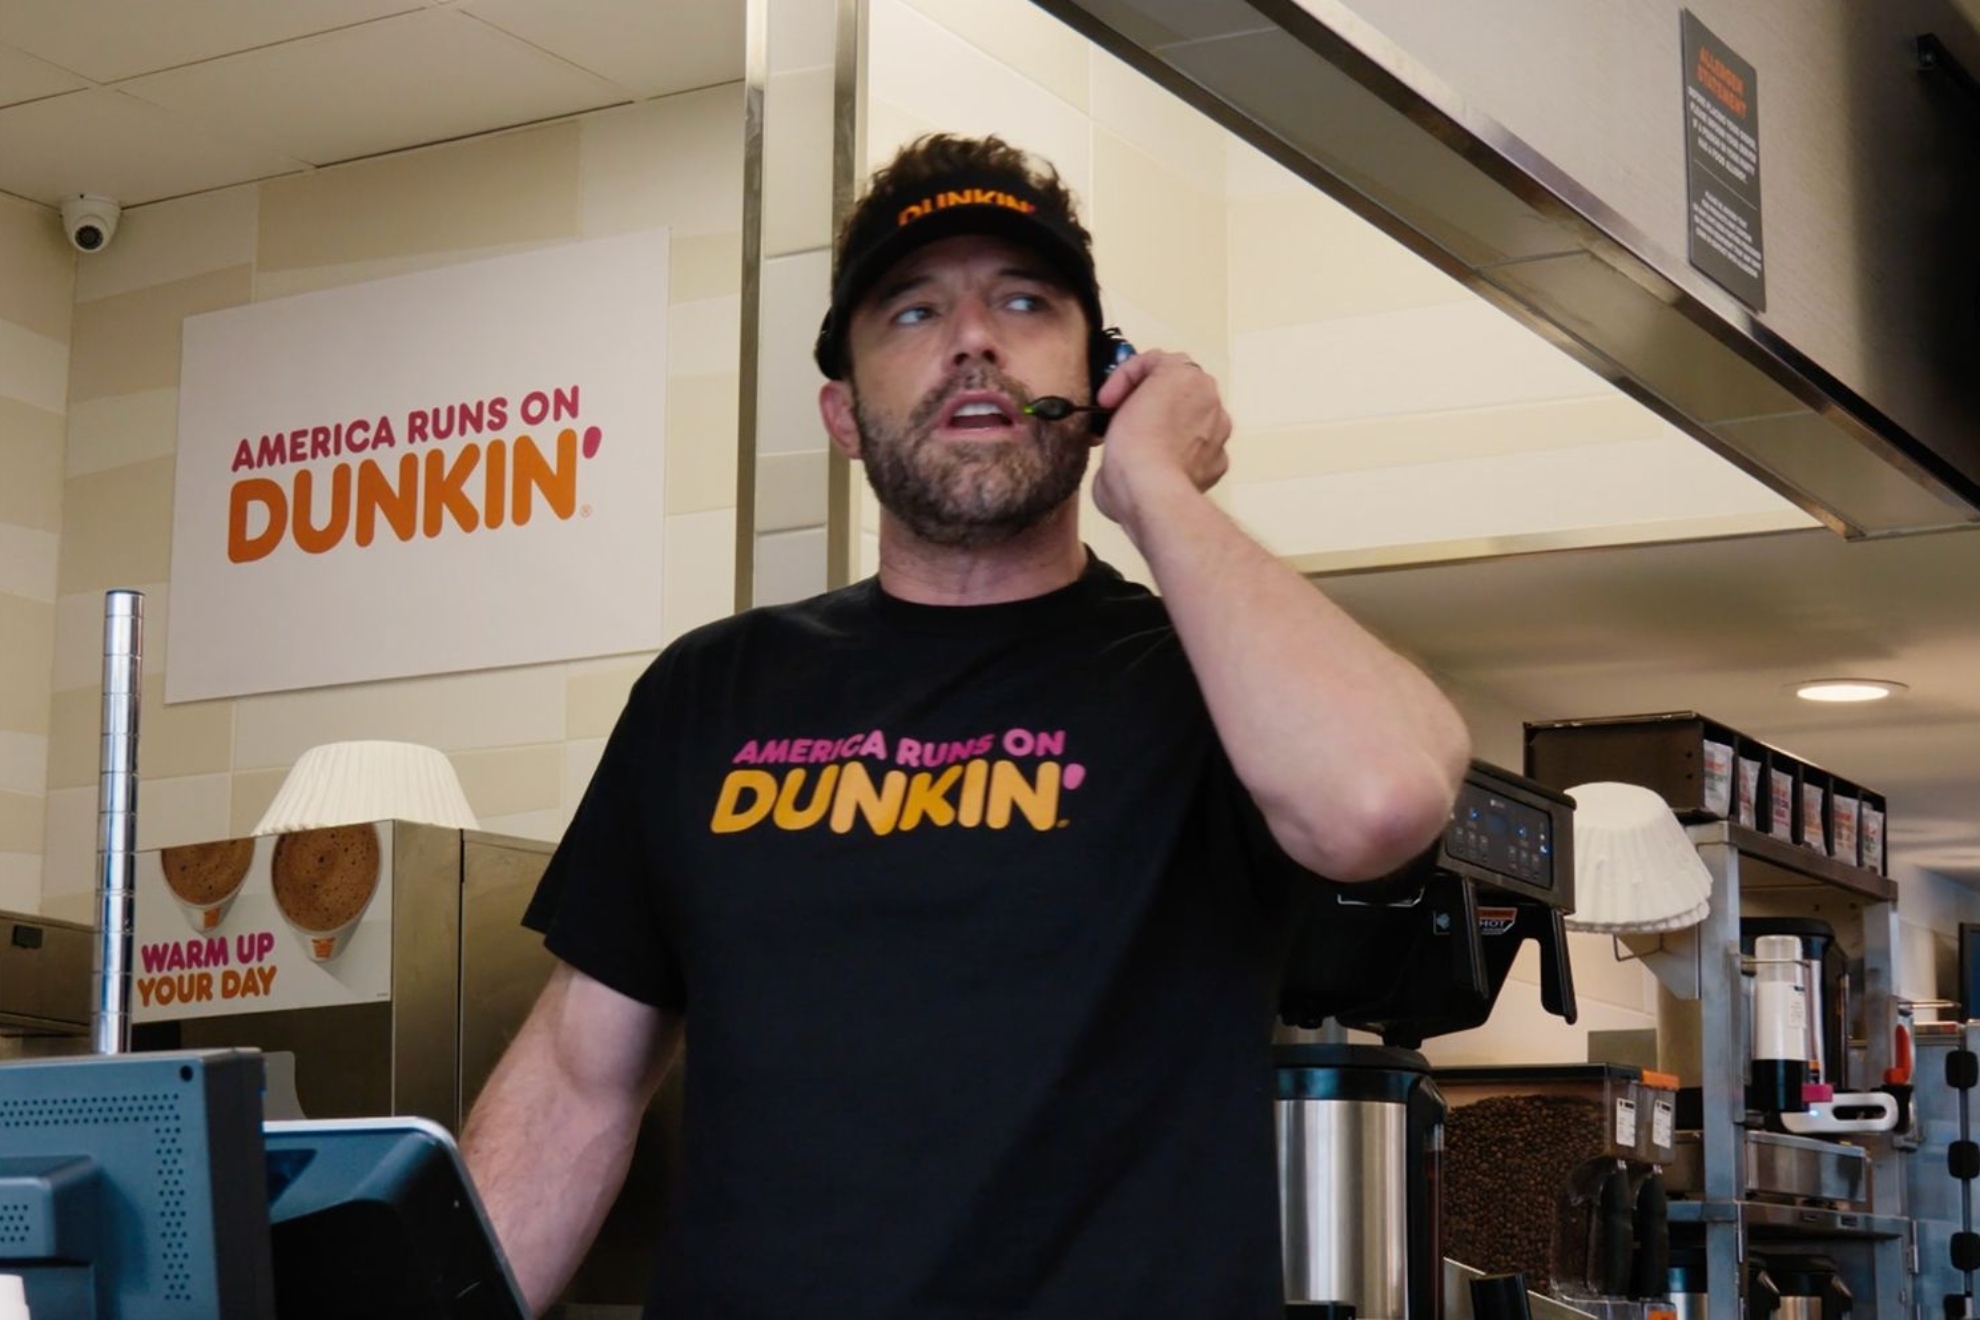 Ben Affleck takes some order at Dunkin' in Super Bowl ad